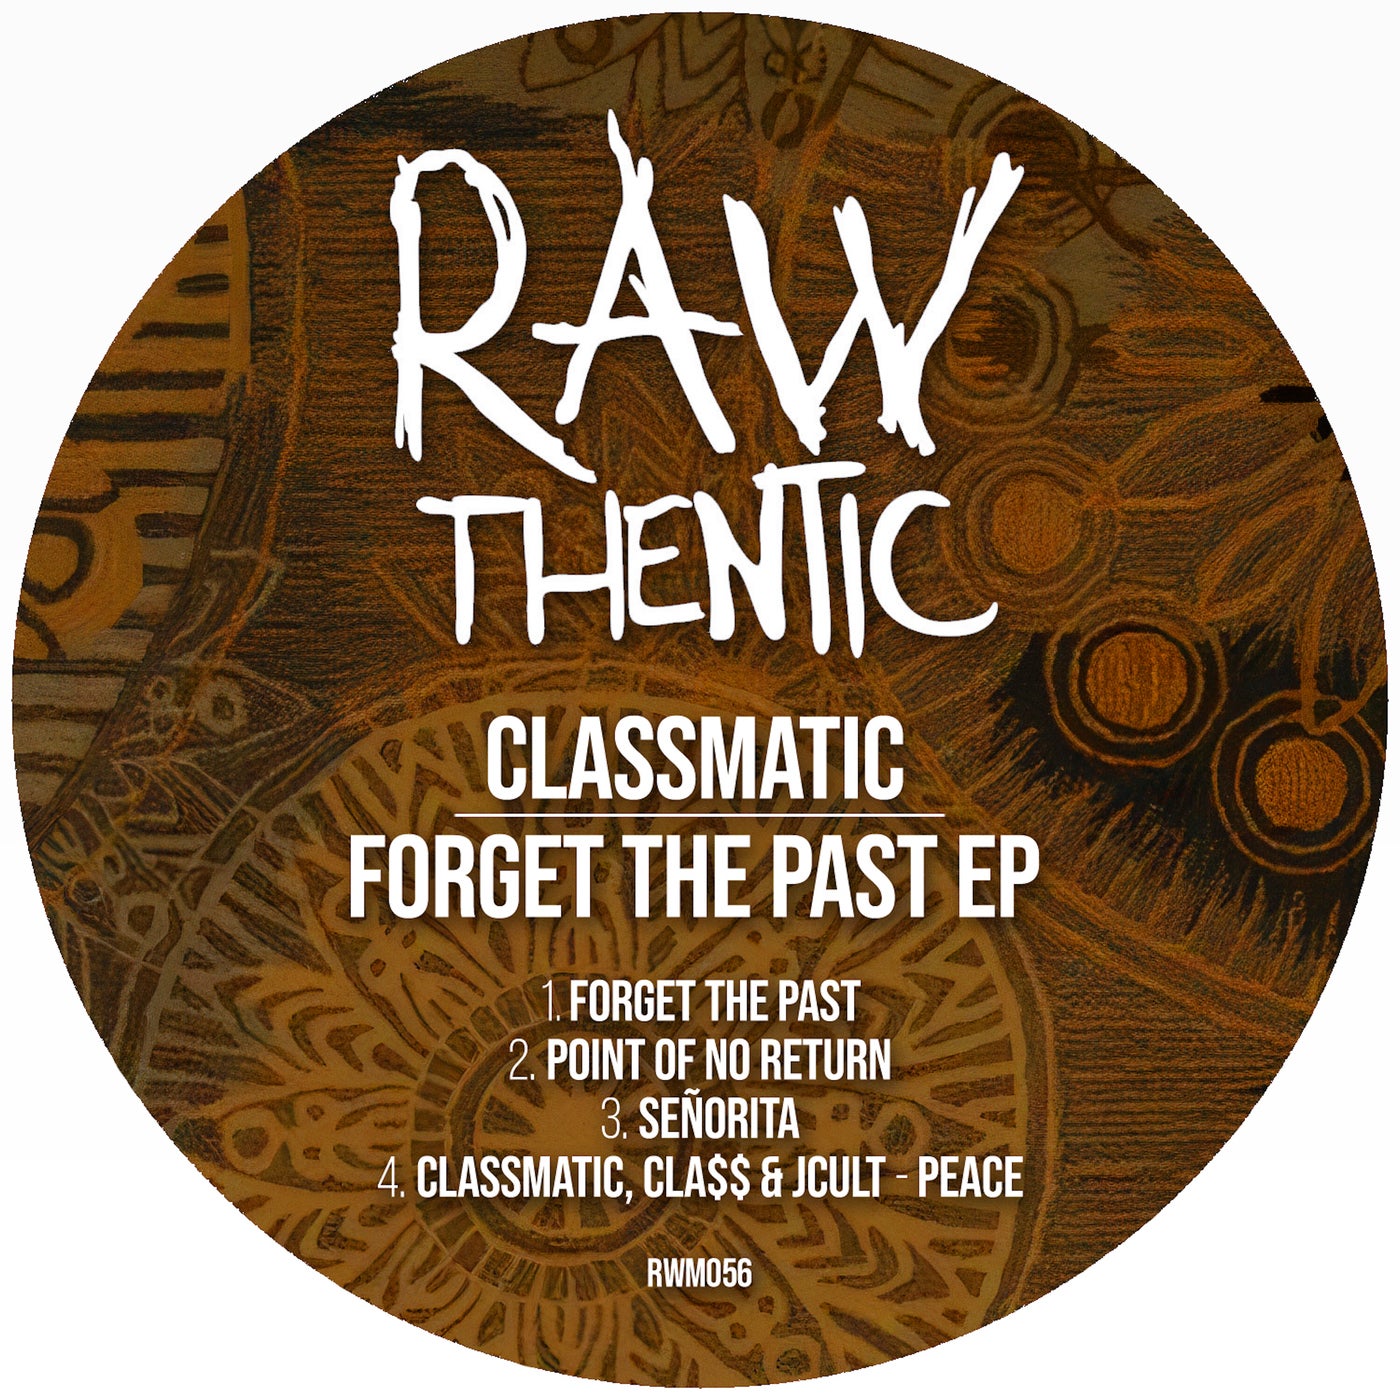 Classmatic – Forget The Past [RWM056]